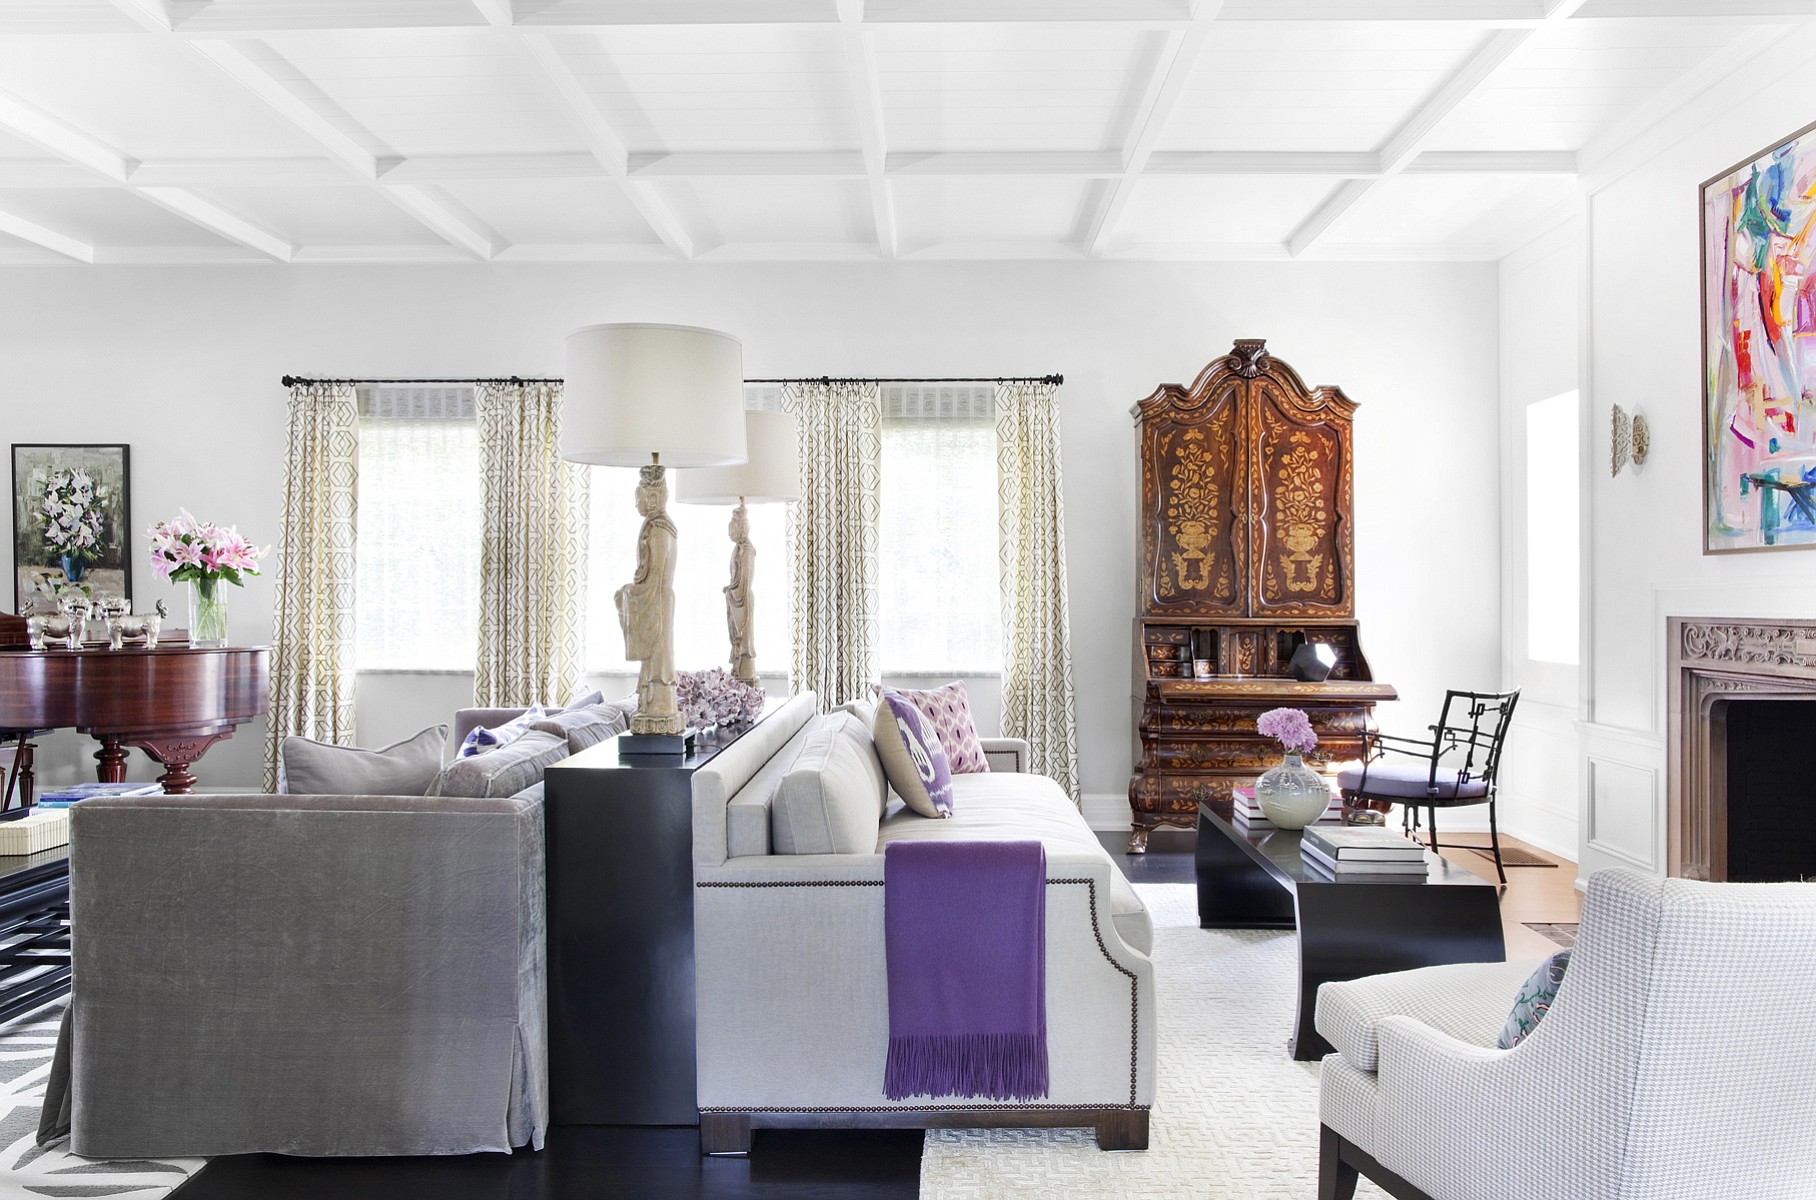 A traditional symmetrical layout gets a fresh twist in this living room designed by Betsy Burnham of Burnham Design inBeverly Hills, Calif.